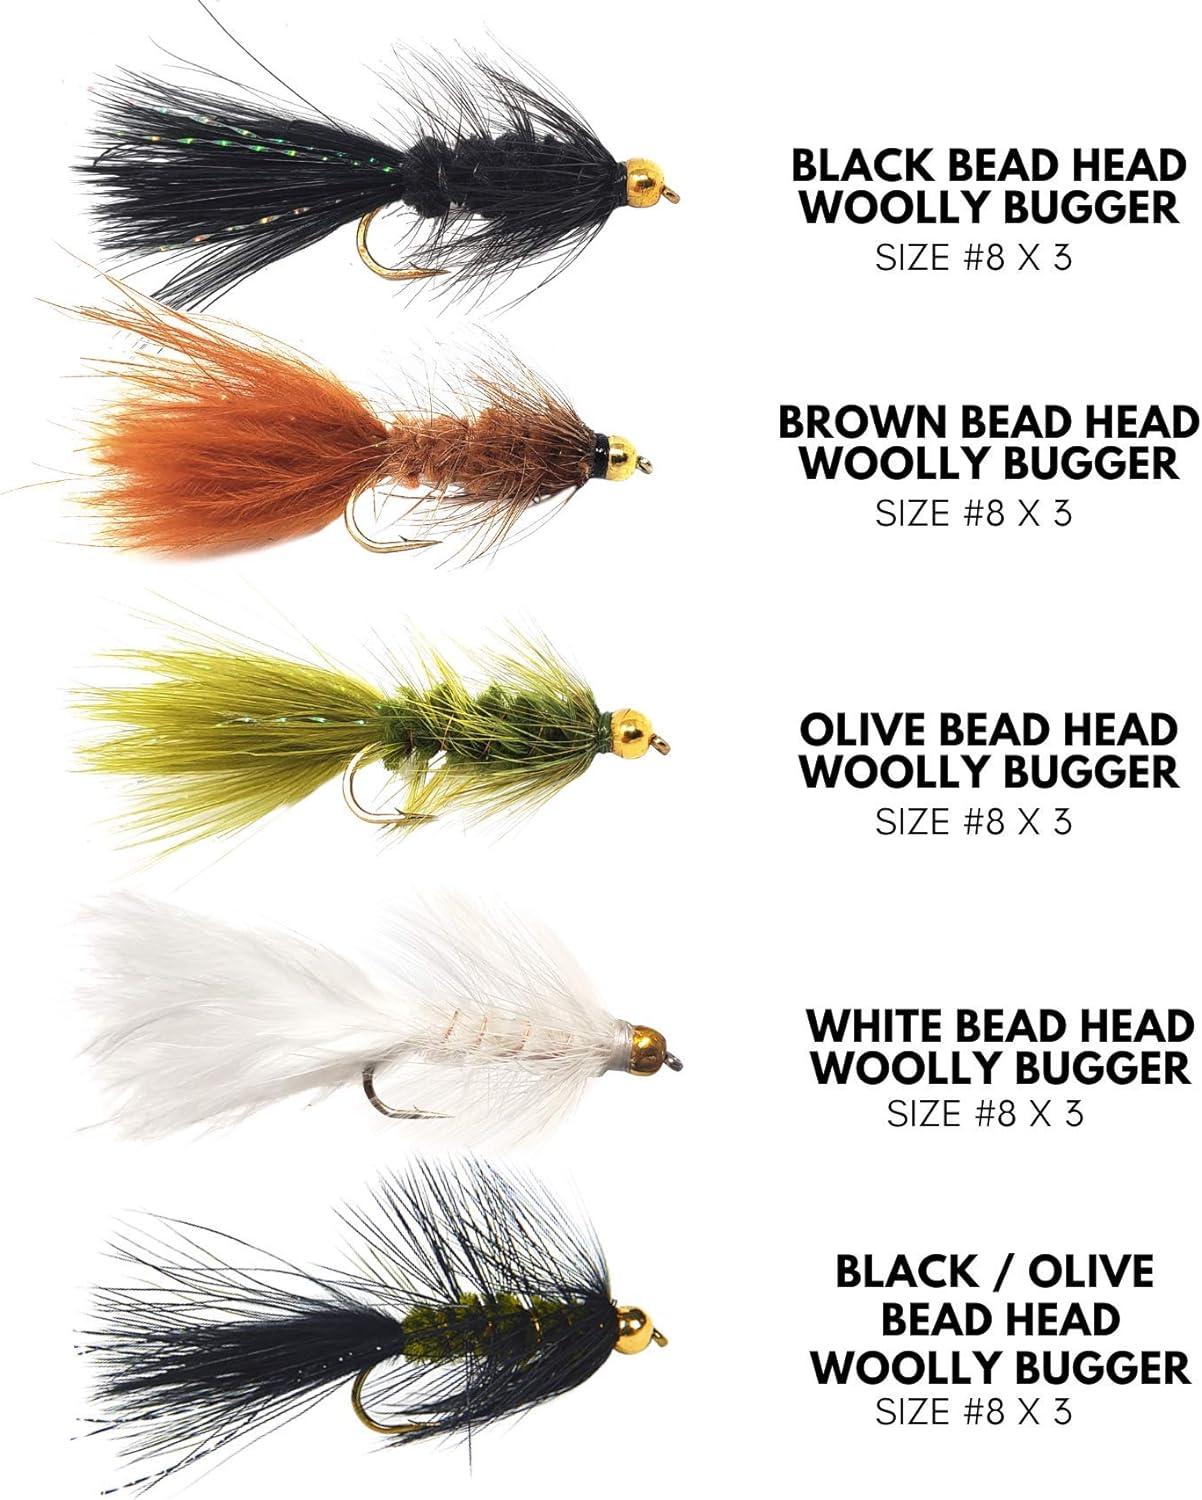 Woolly Bugger Trout Fly Fishing Streamer Assortment 15 Pack Size #8